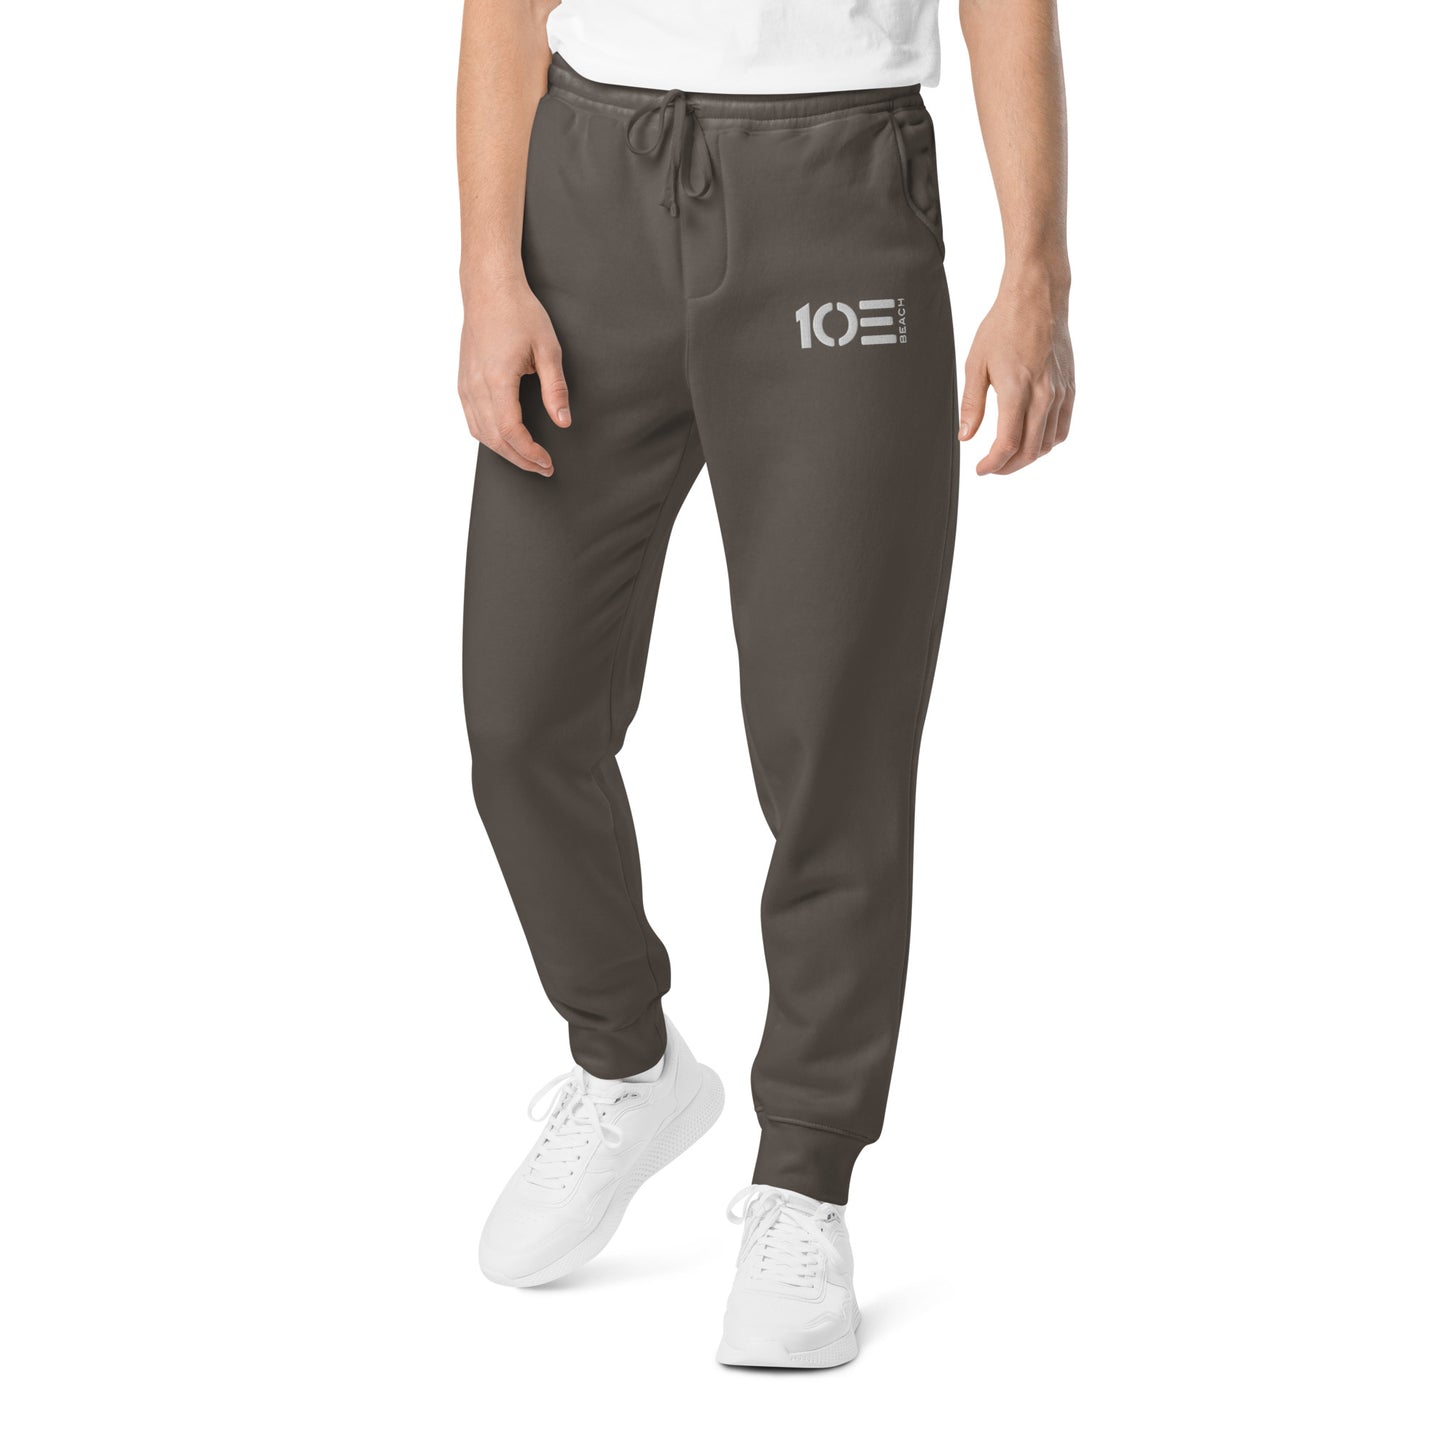 OOE Beach Embroidered Pigment-Dyed Sweatpants